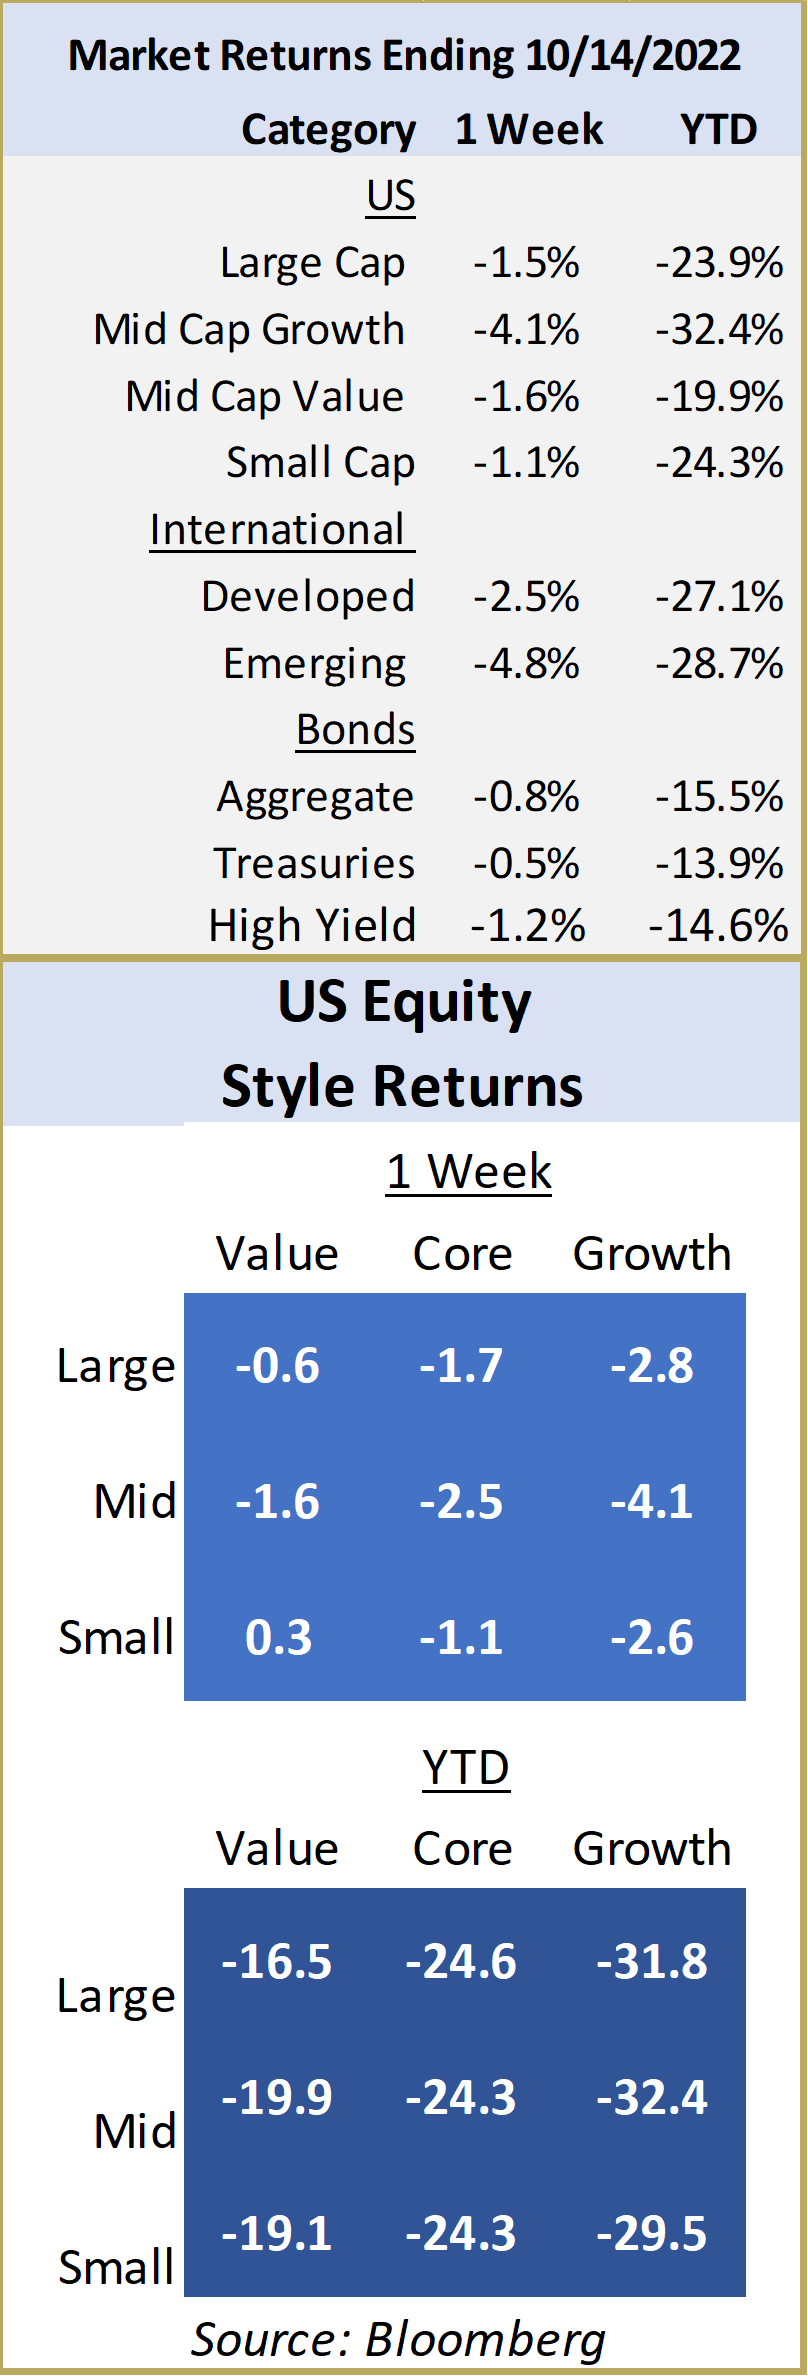 Market Returns Ending 10/14/2022 and US Equity Style Returns